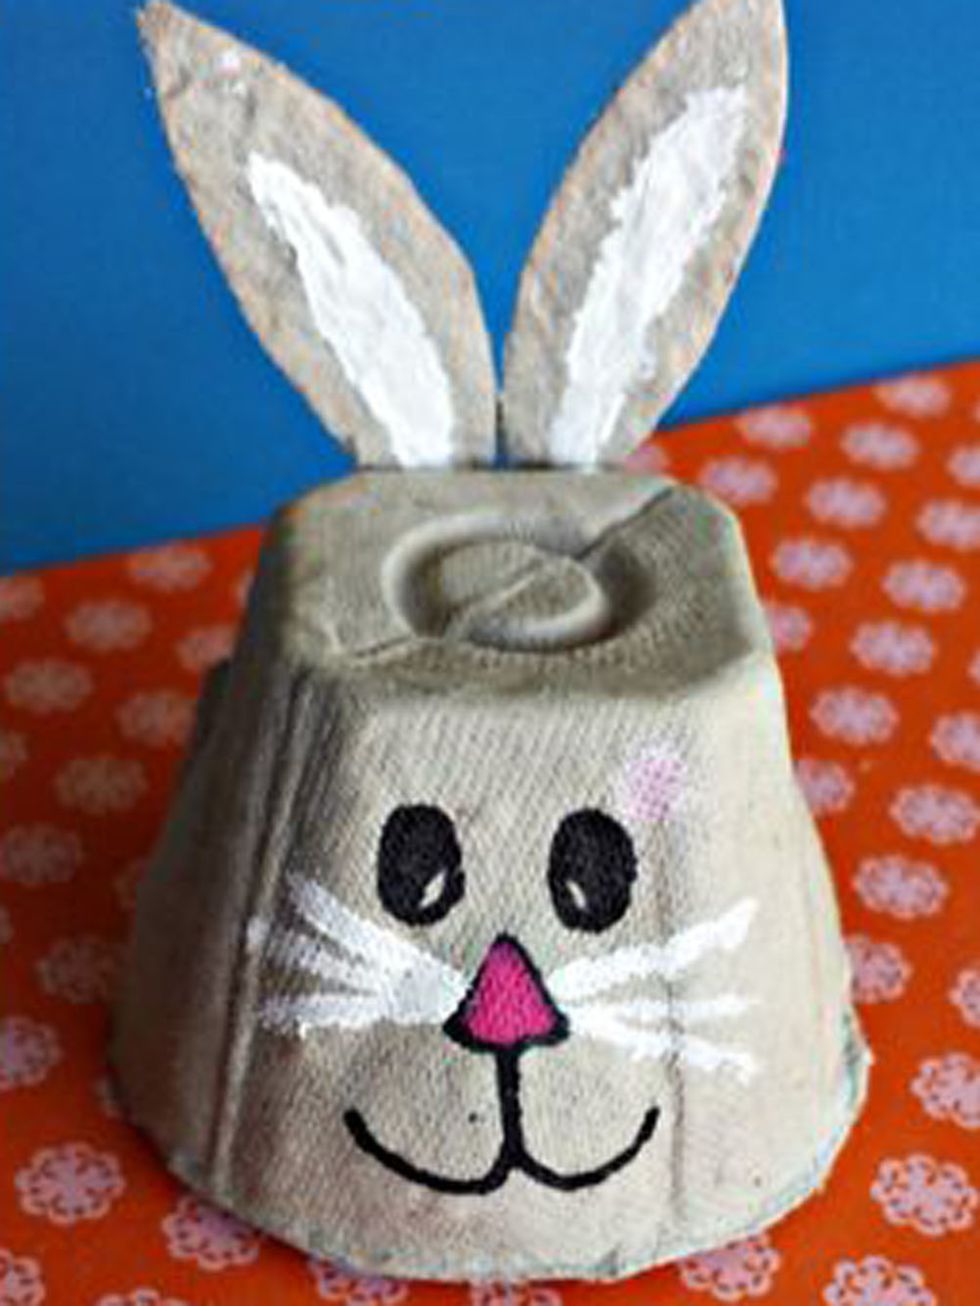 Pattern, Design, Rabbits and Hares, Craft, Creative arts, Fictional character, Pattern, Stuffed toy, Rabbit, Hare, 